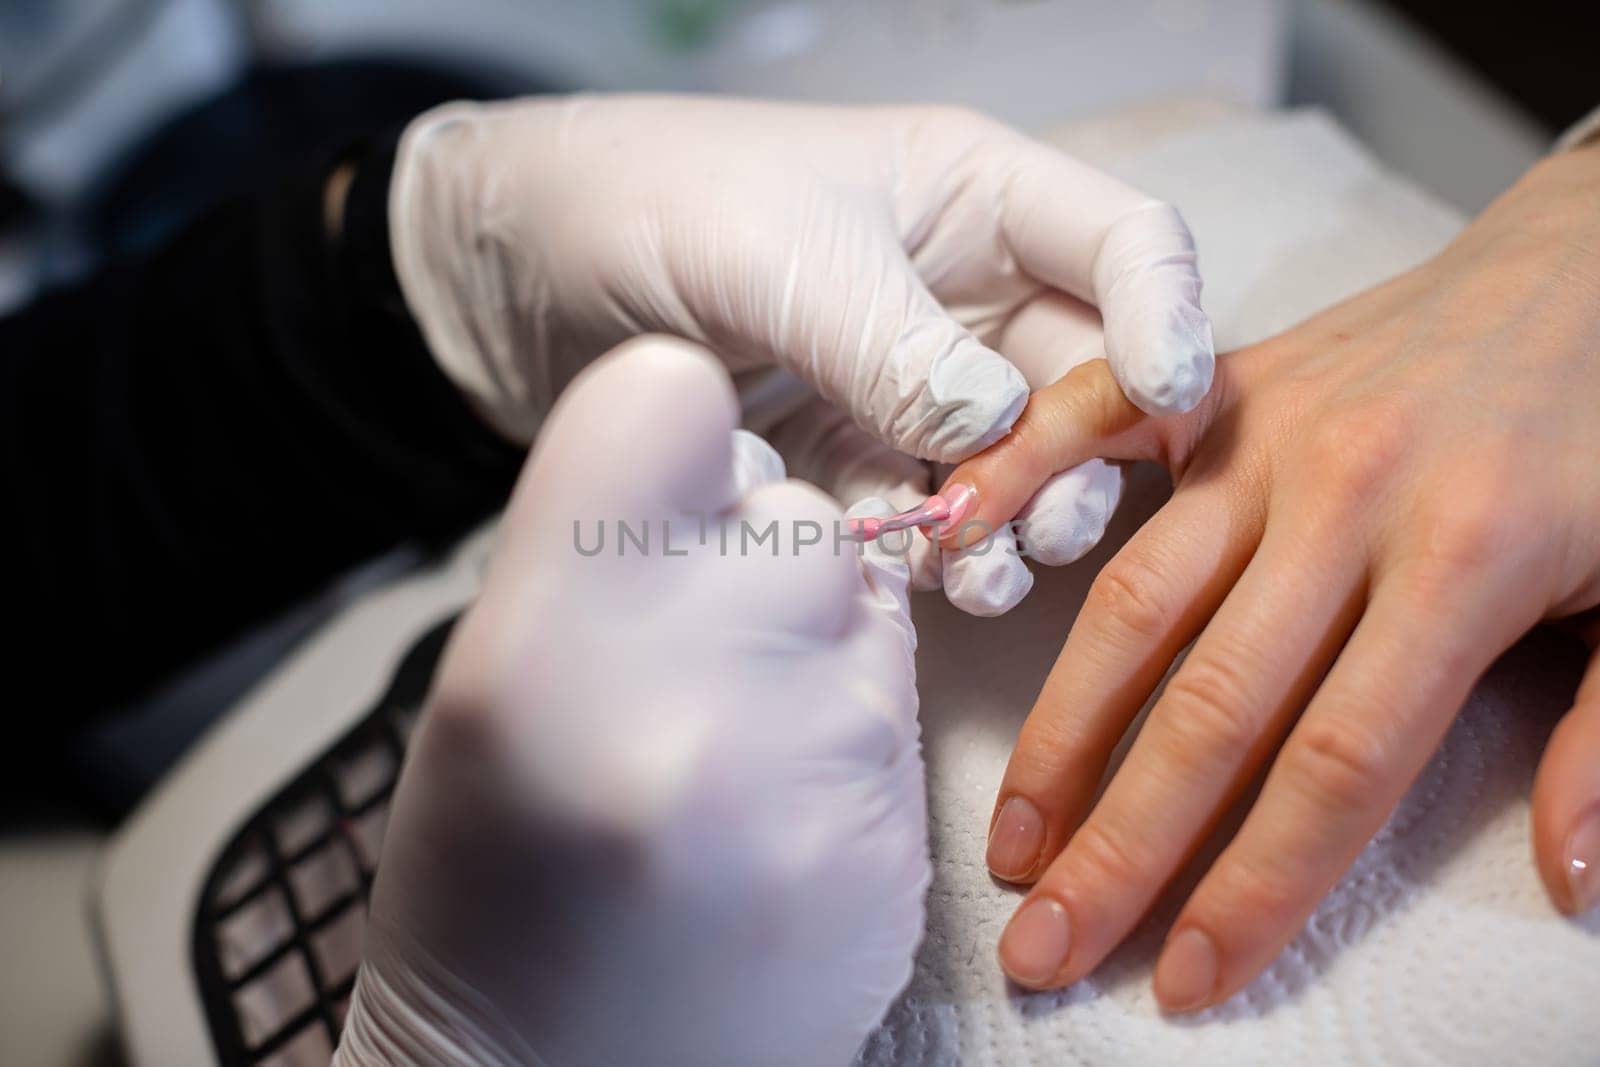 Latex gloves worn by a professional beautician. Top view of the client's and beautician's hands. A client of the beauty salon has a manicure performed.